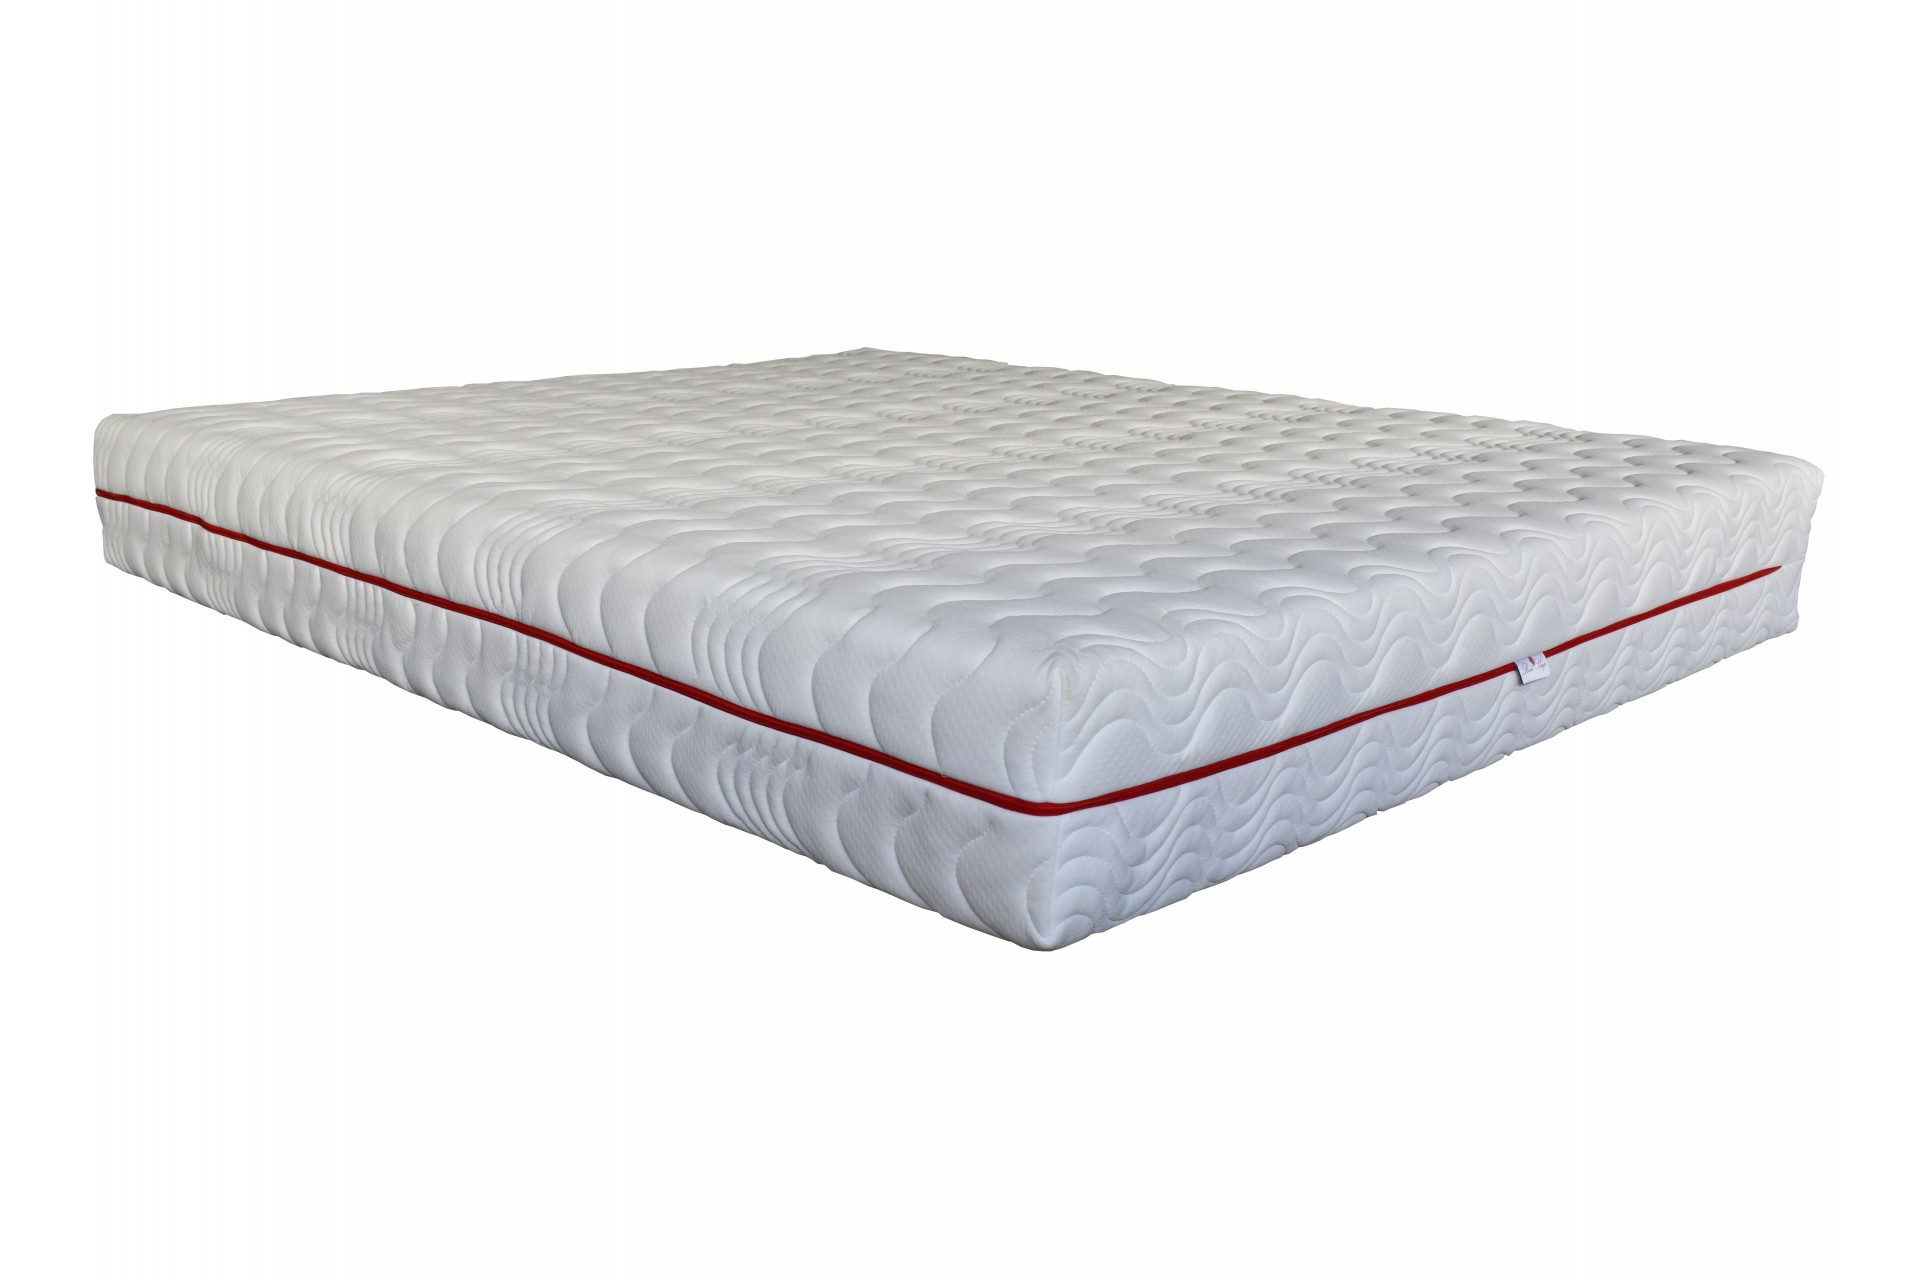 Quilted polyester mattress...